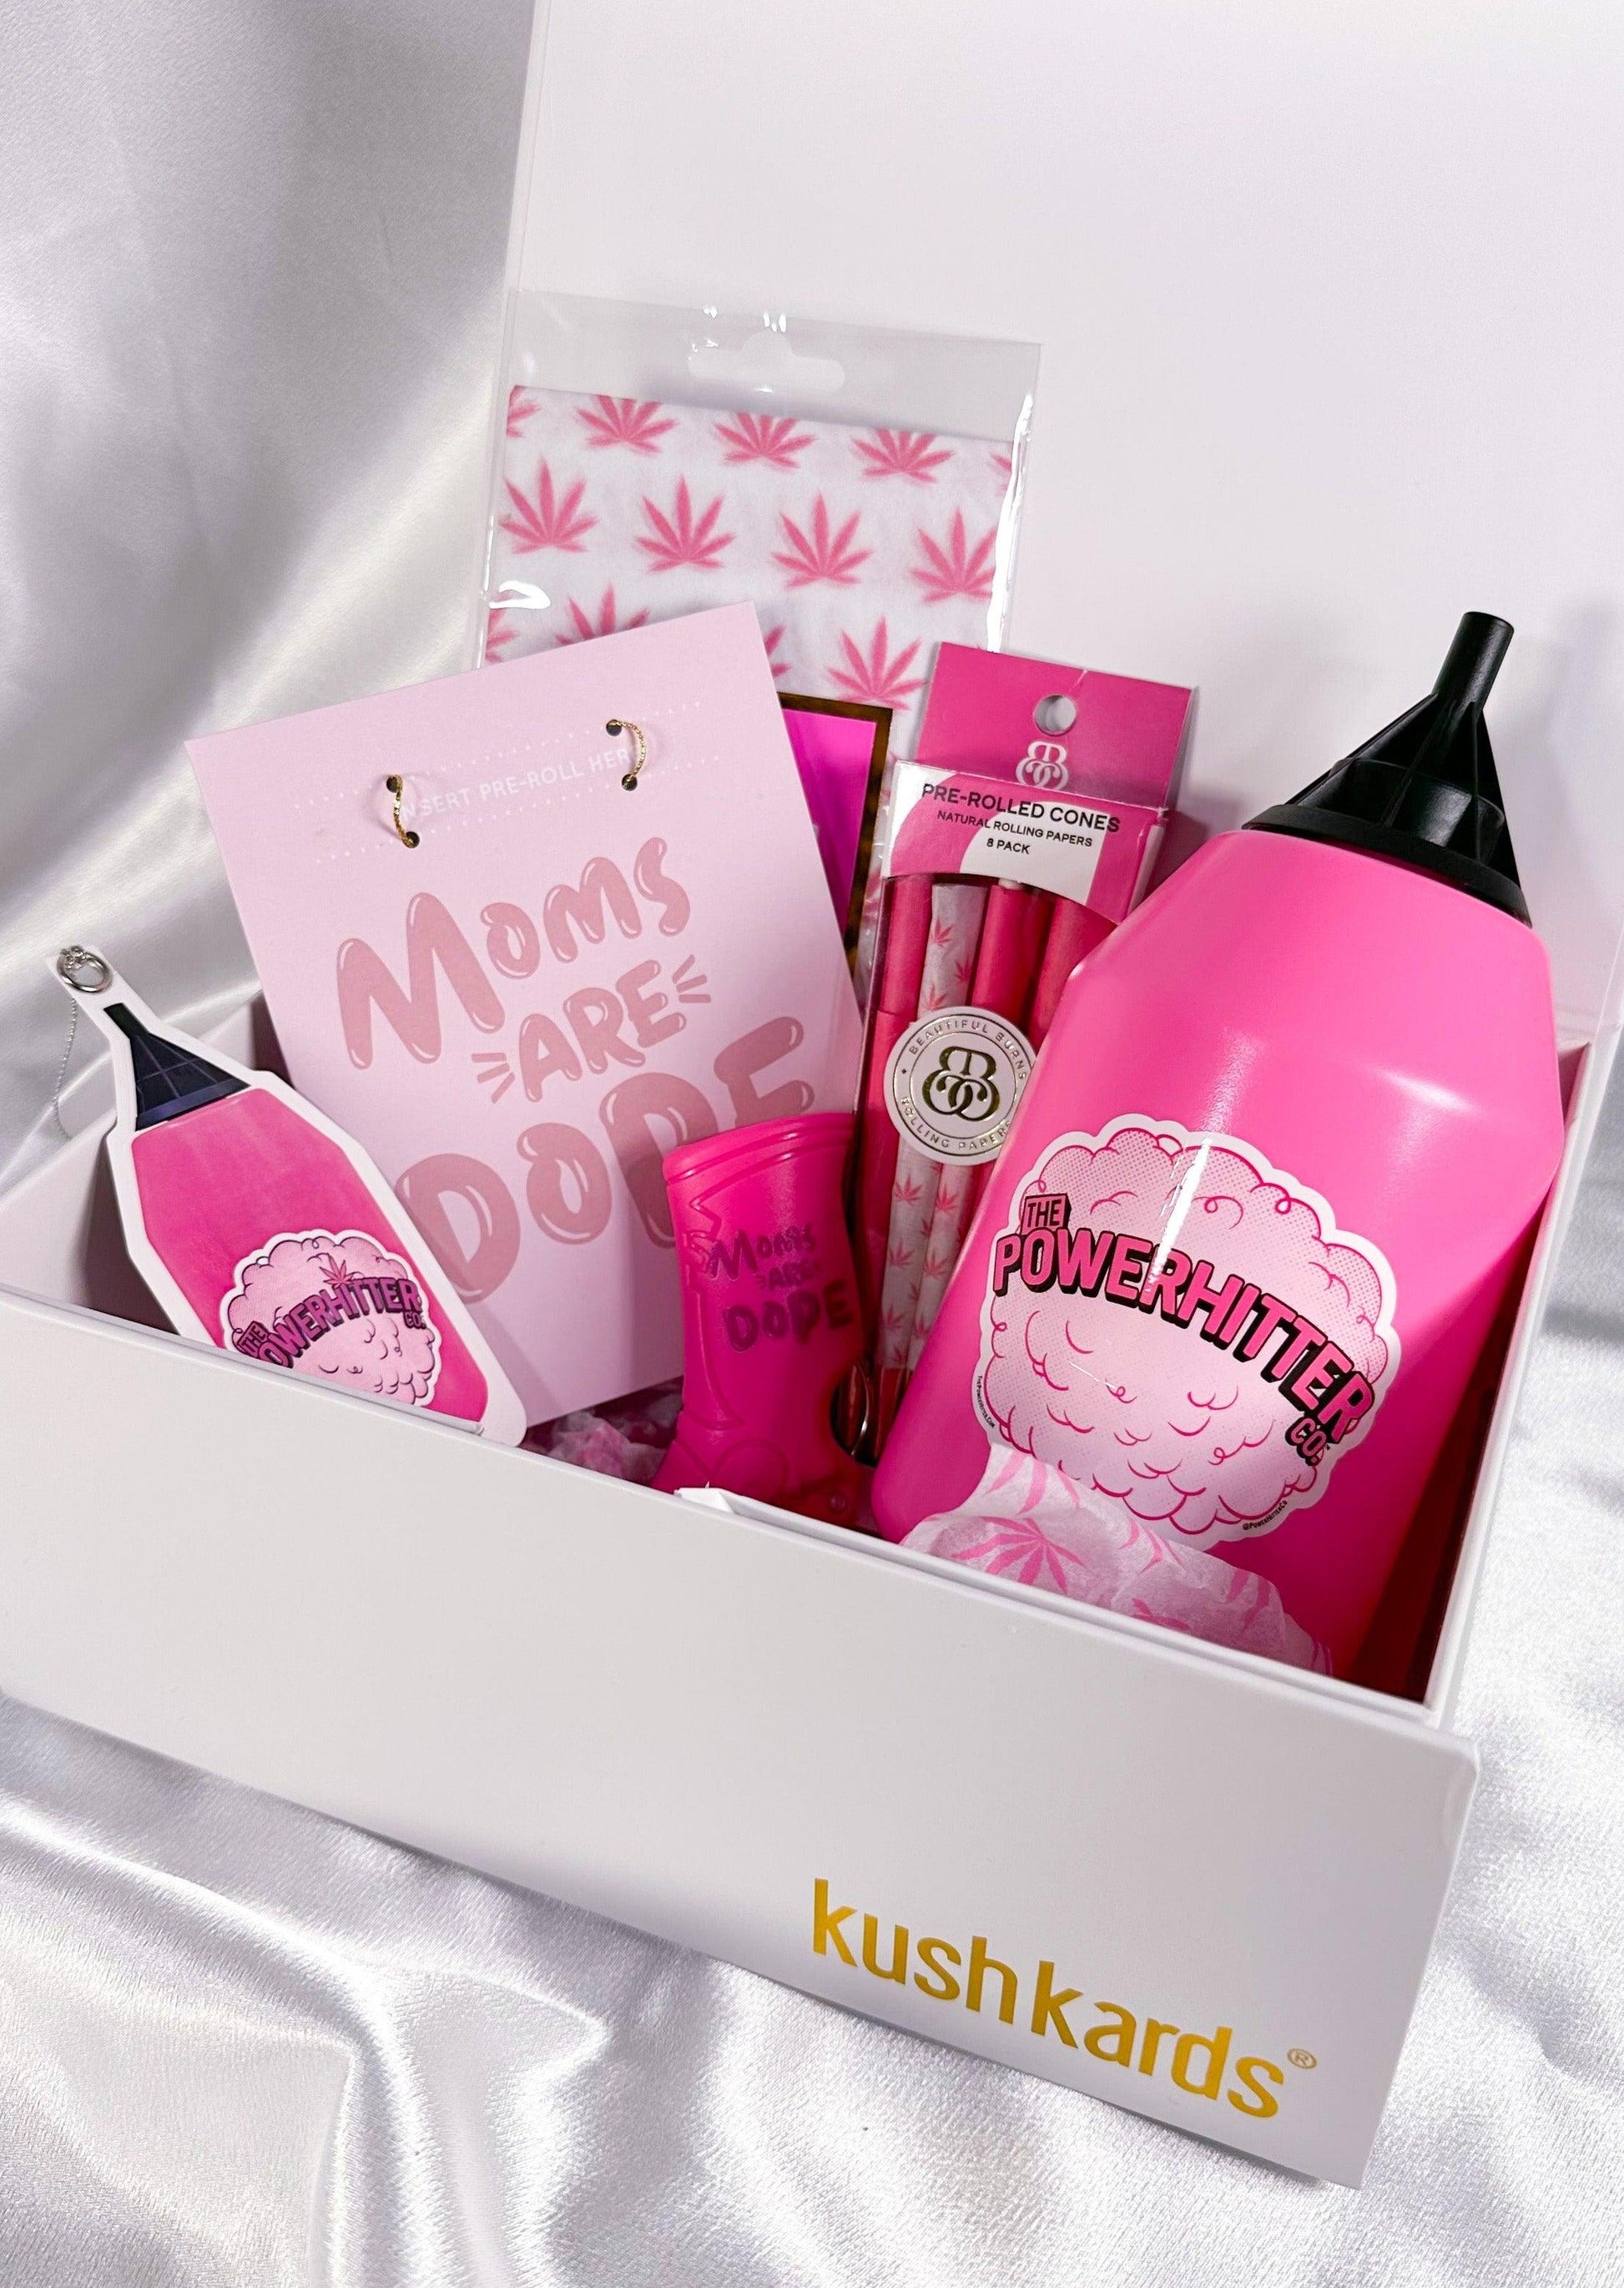 💗 For the Dope Mom Gift Box Set / 420 Mother's Day Gifts / Stoner